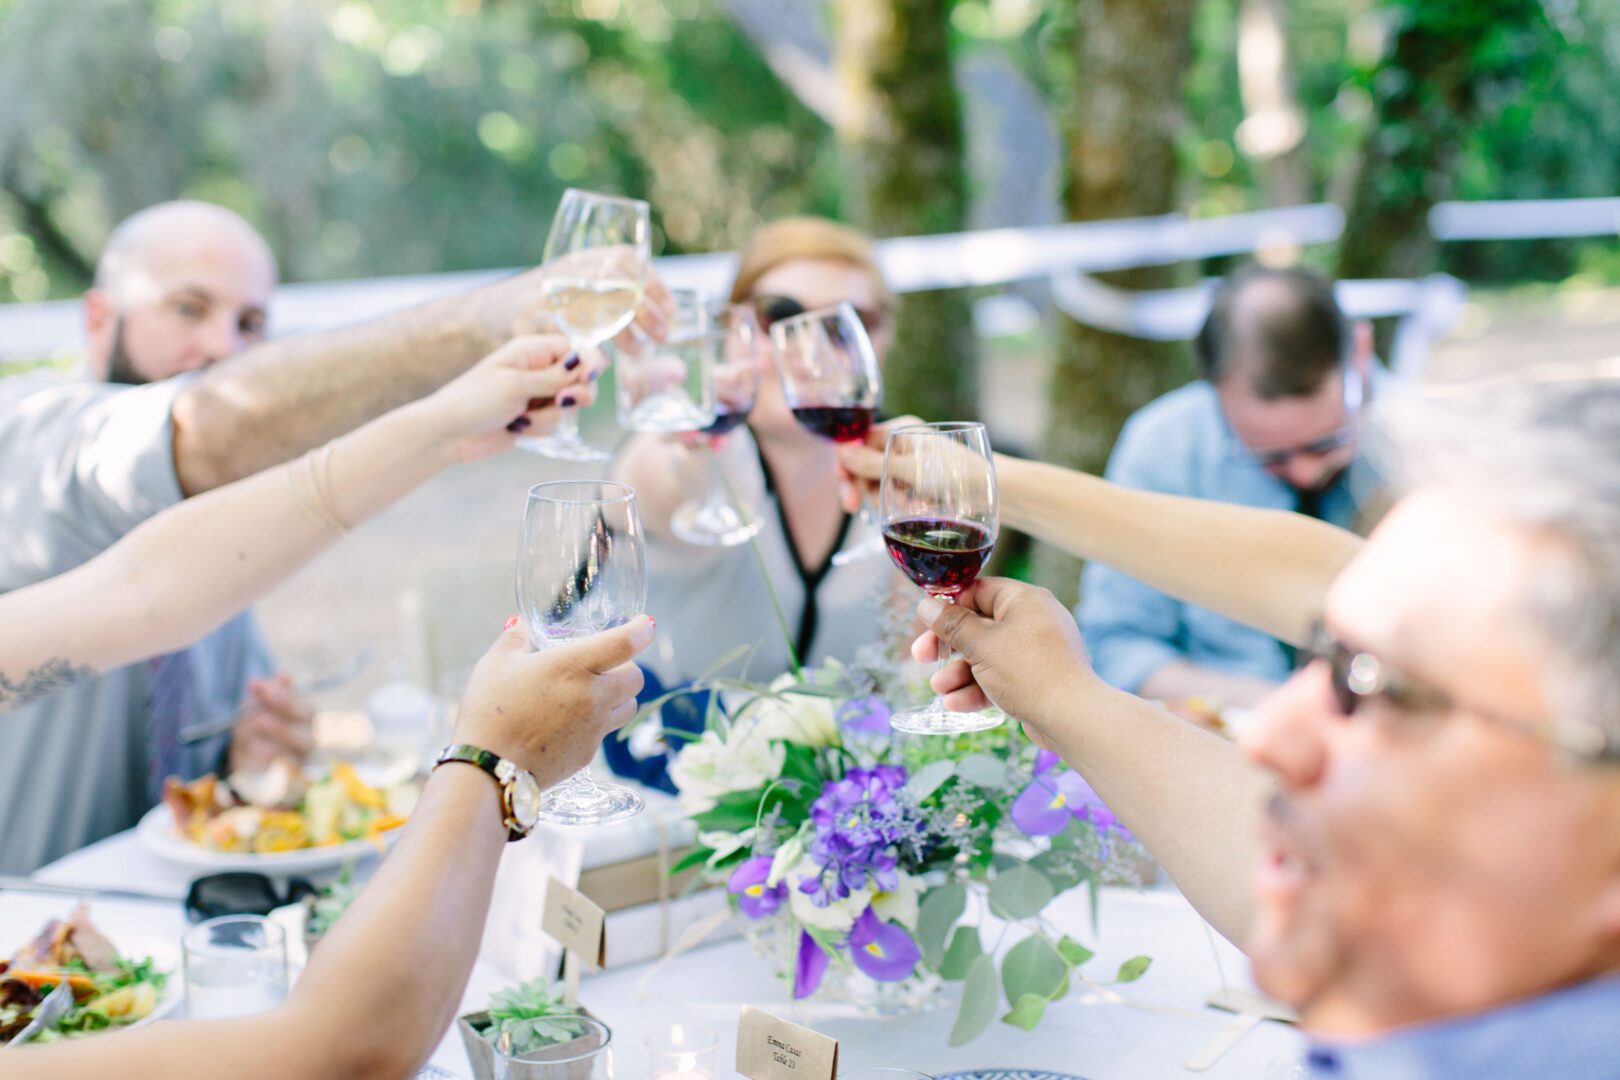 A group of people toasting wine glasses at an outdoor table.